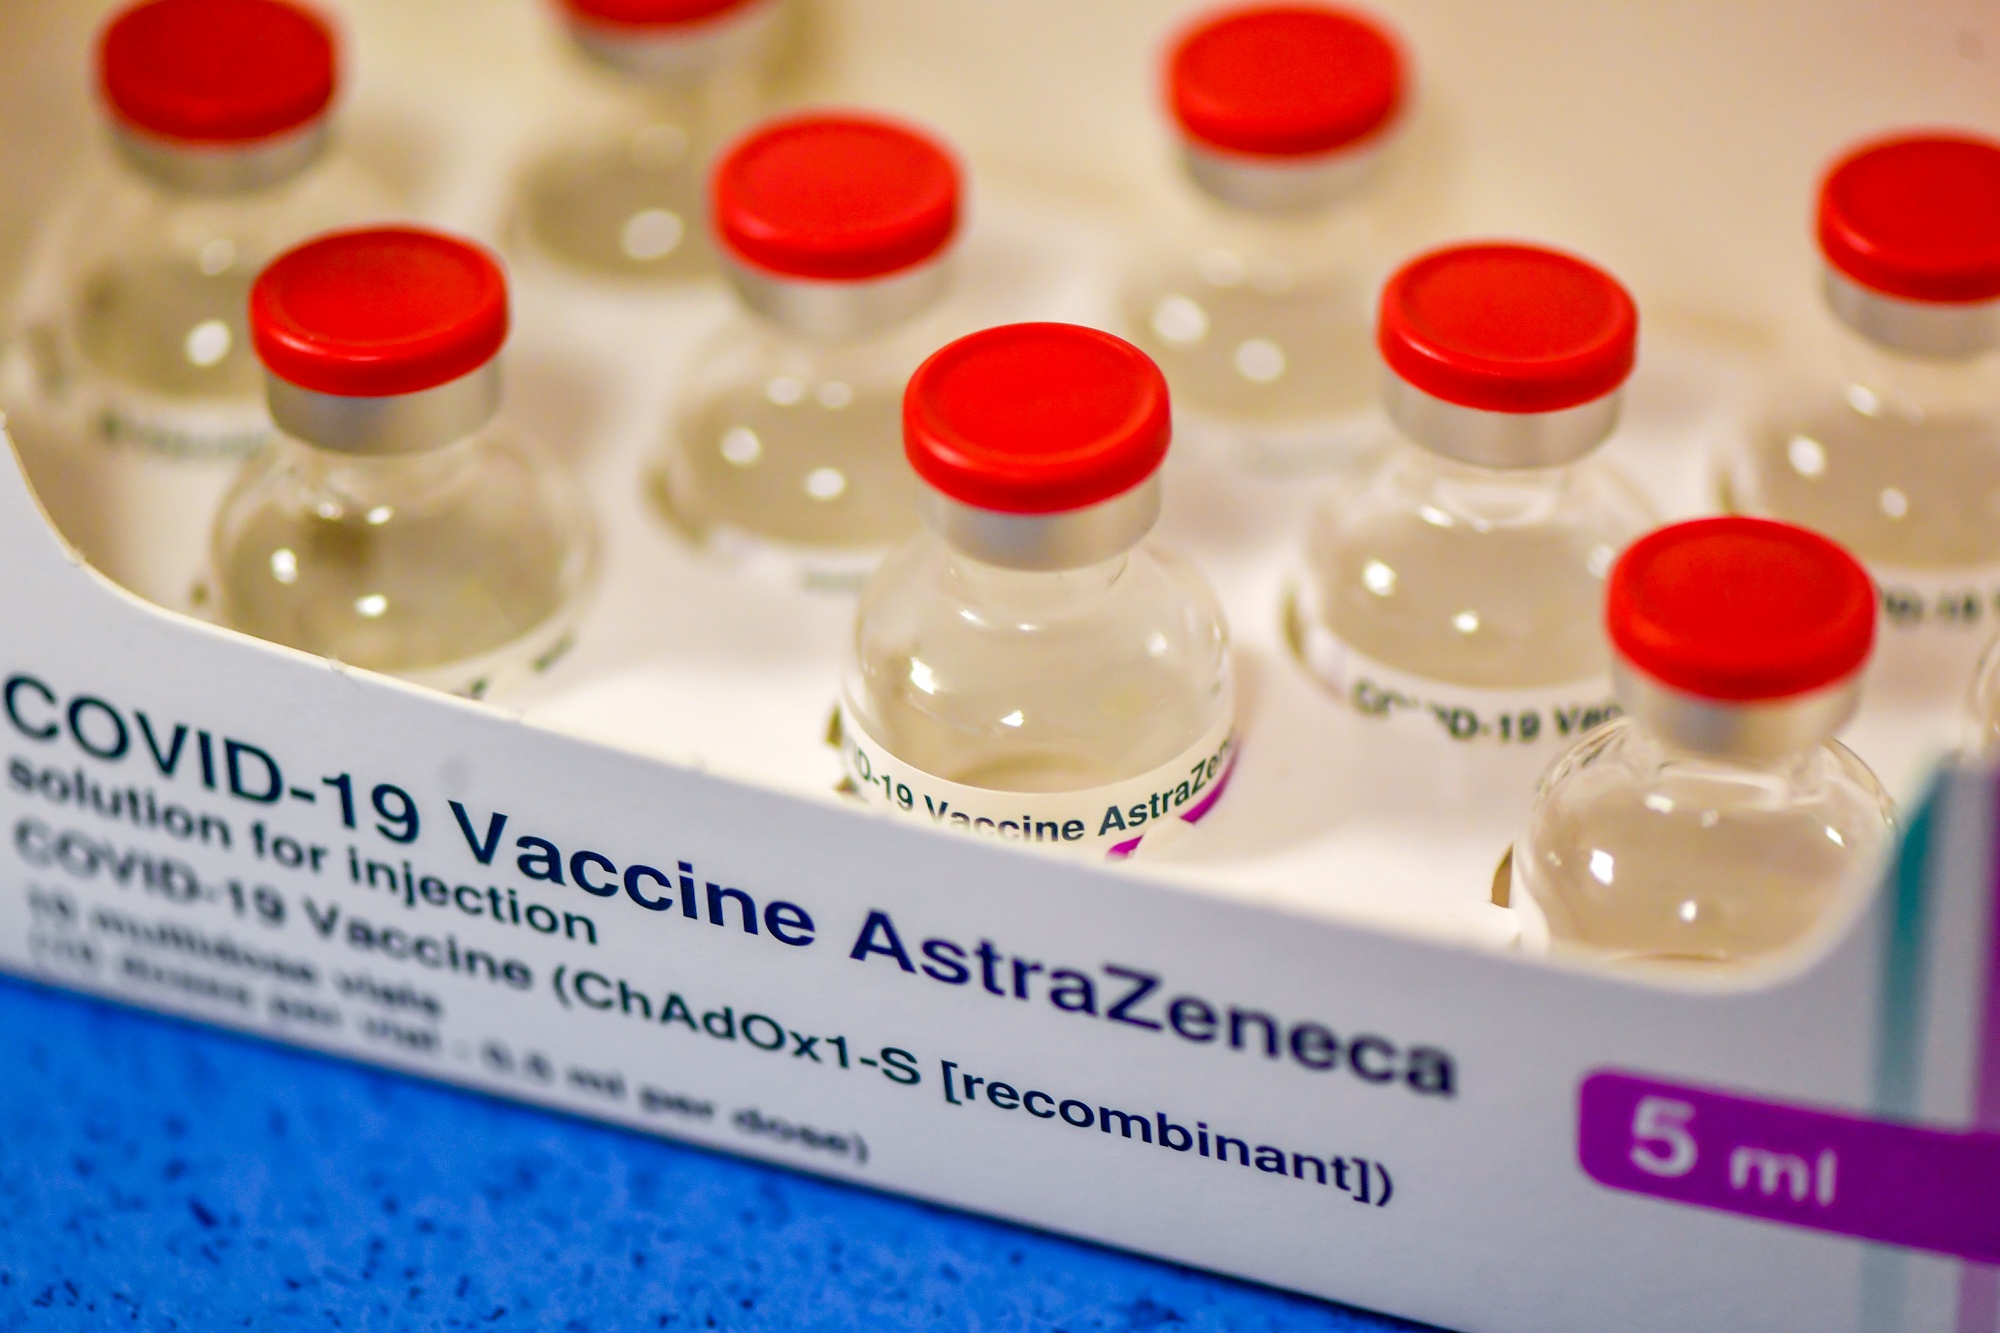 Vials of the AstraZeneca Plc and the University of Oxford Covid-19 vaccines.